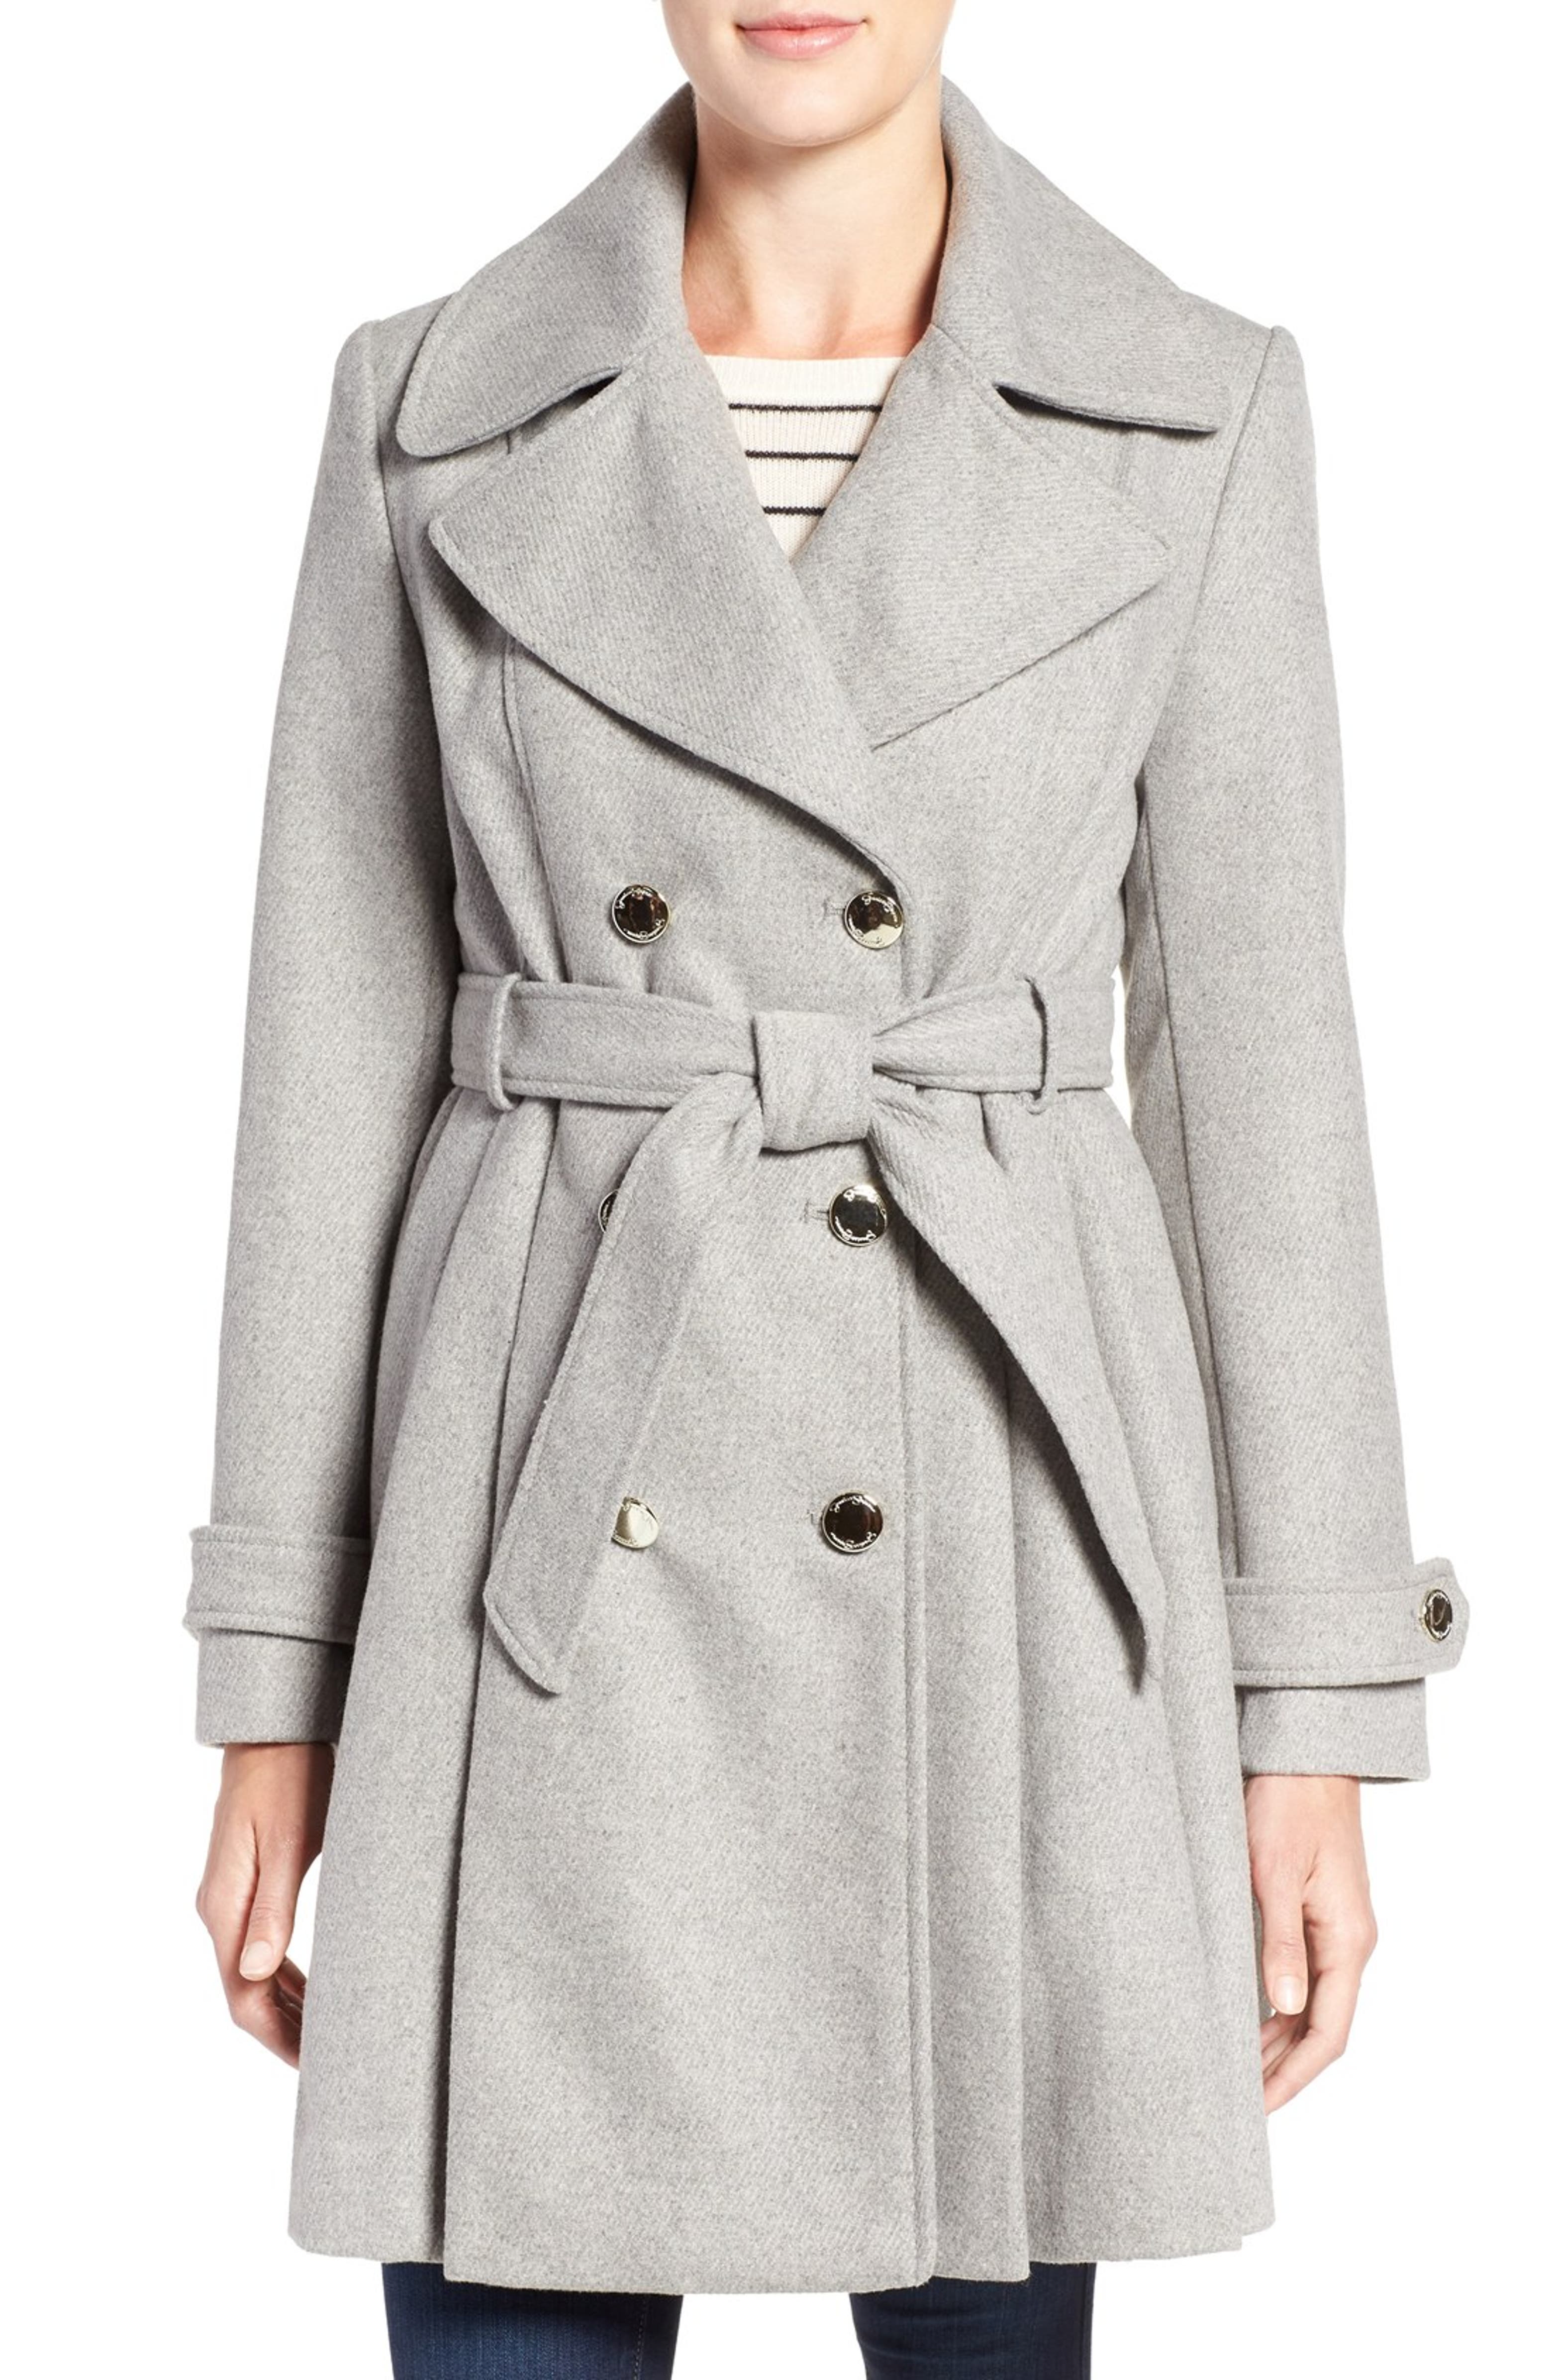 Jessica Simpson Fit & Flare Trench Coat | Nordstrom